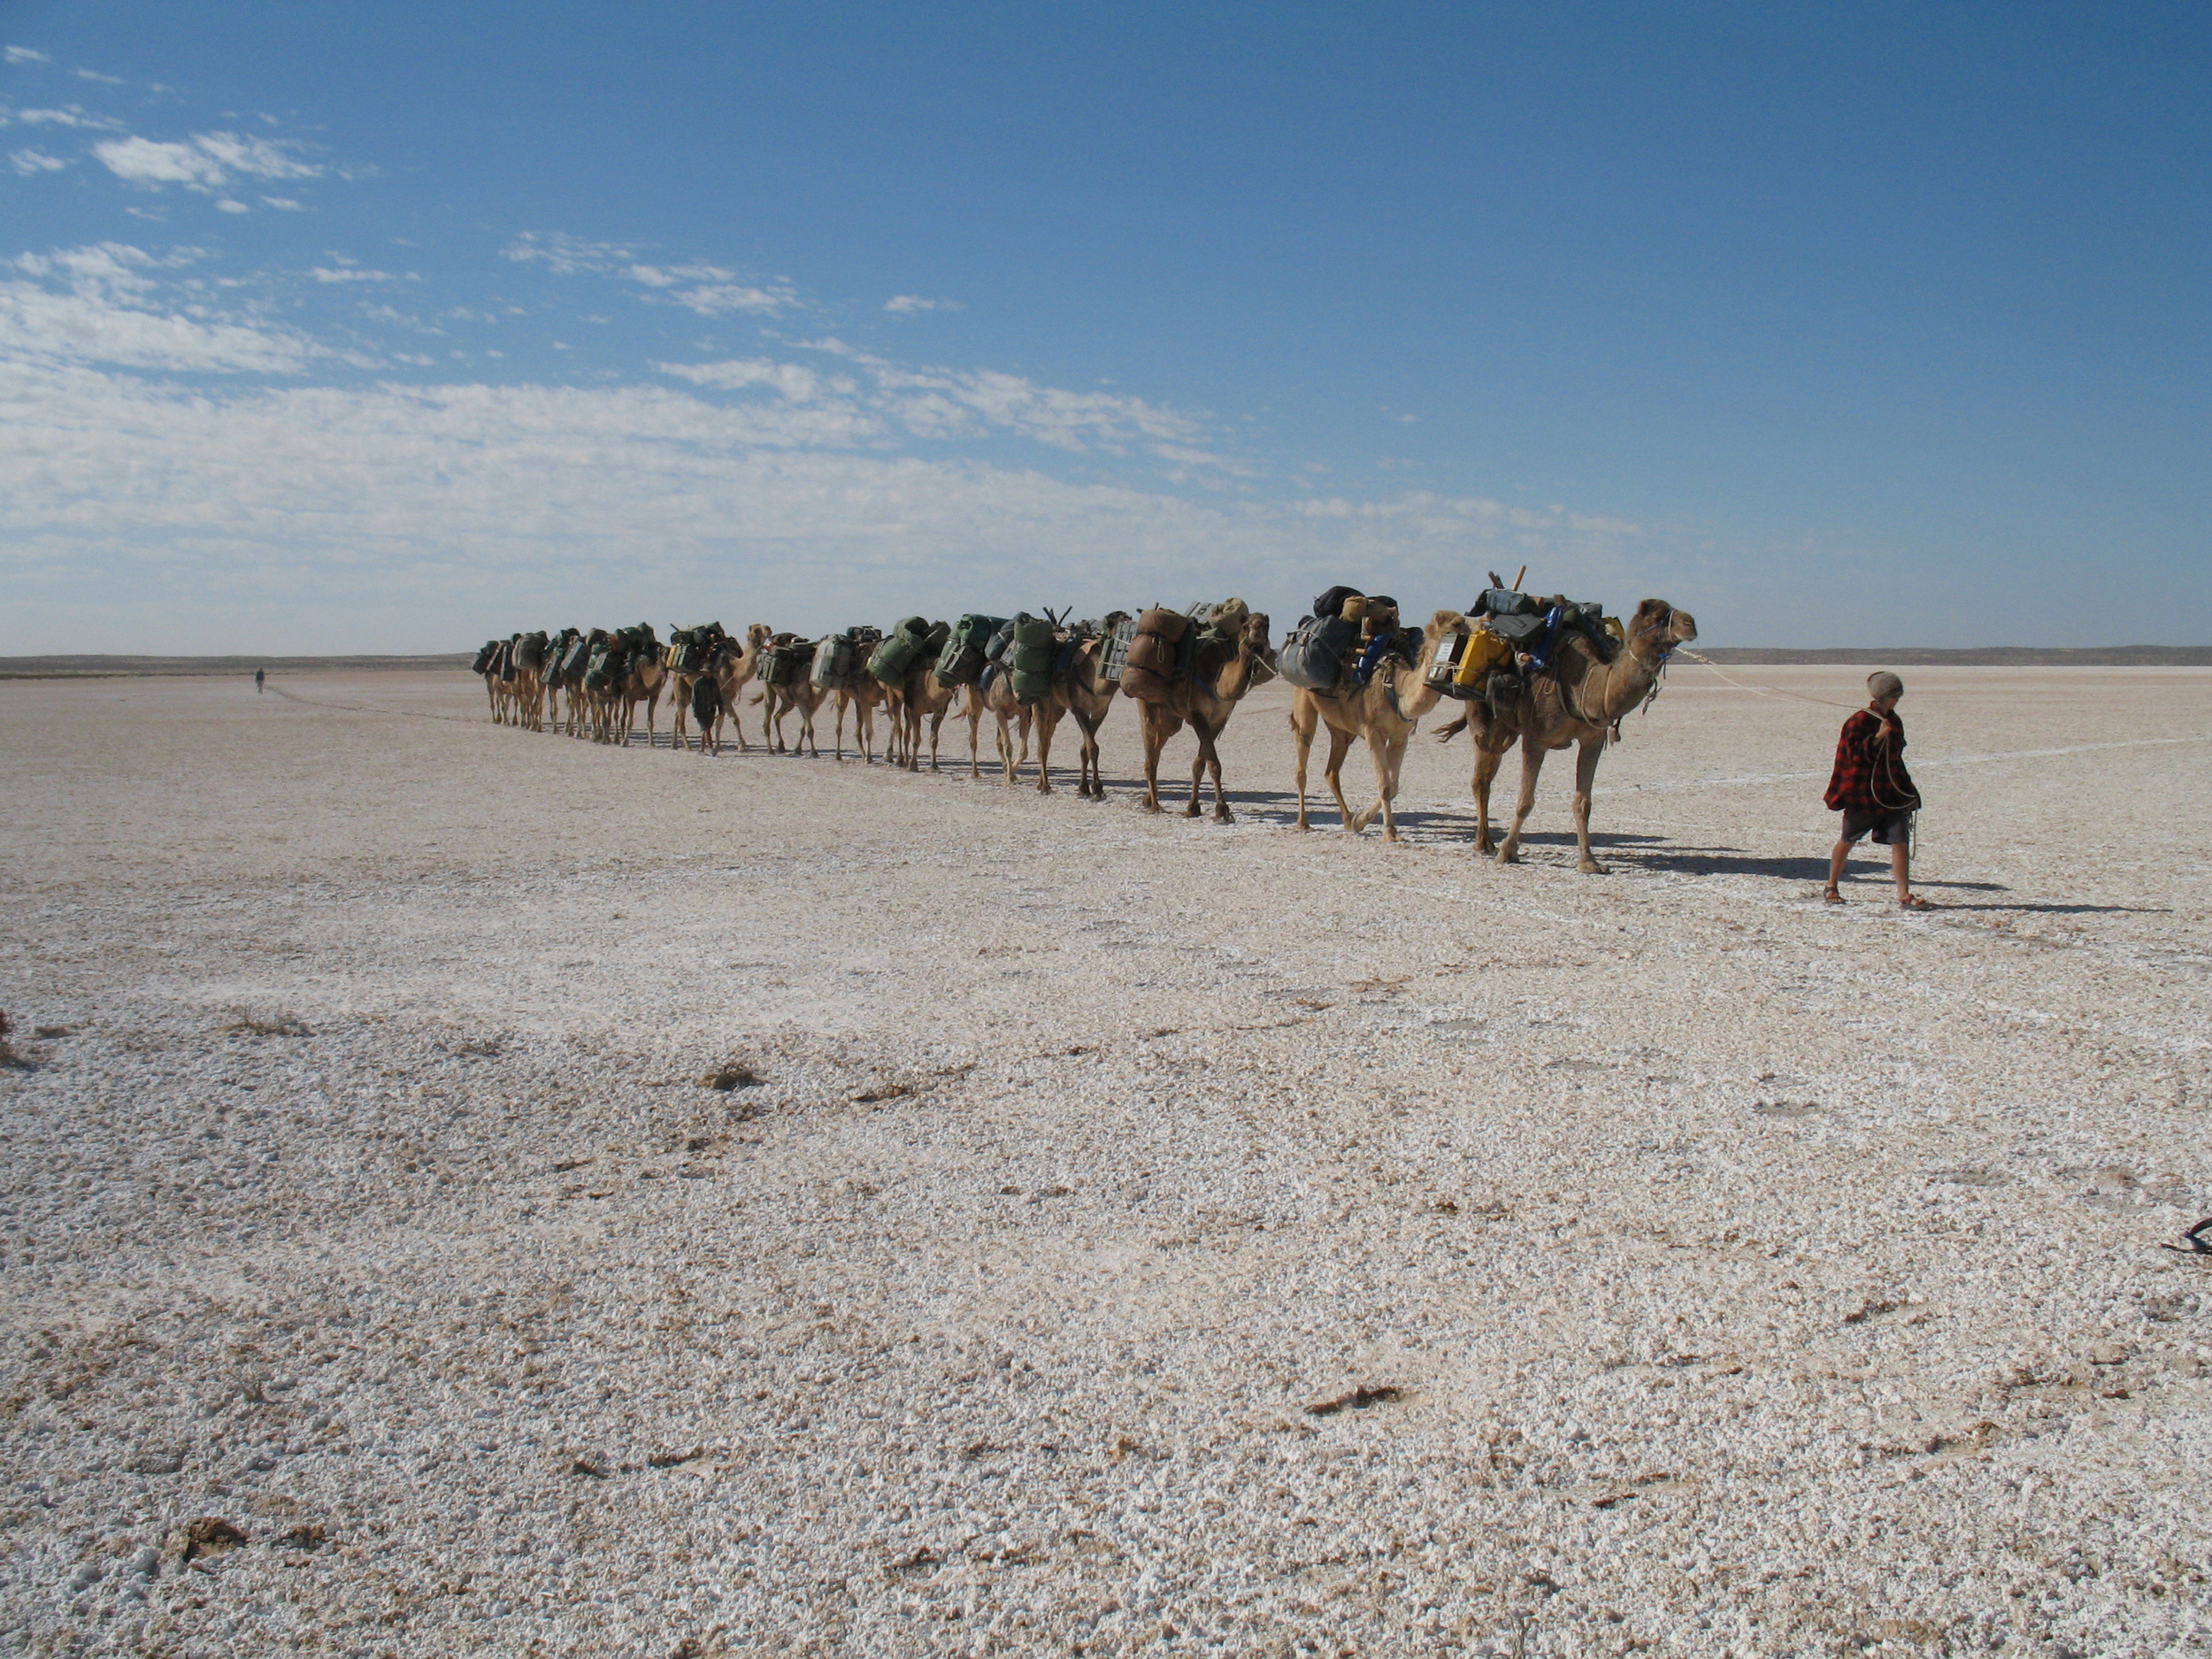 Leading the camels across a small salt lake.